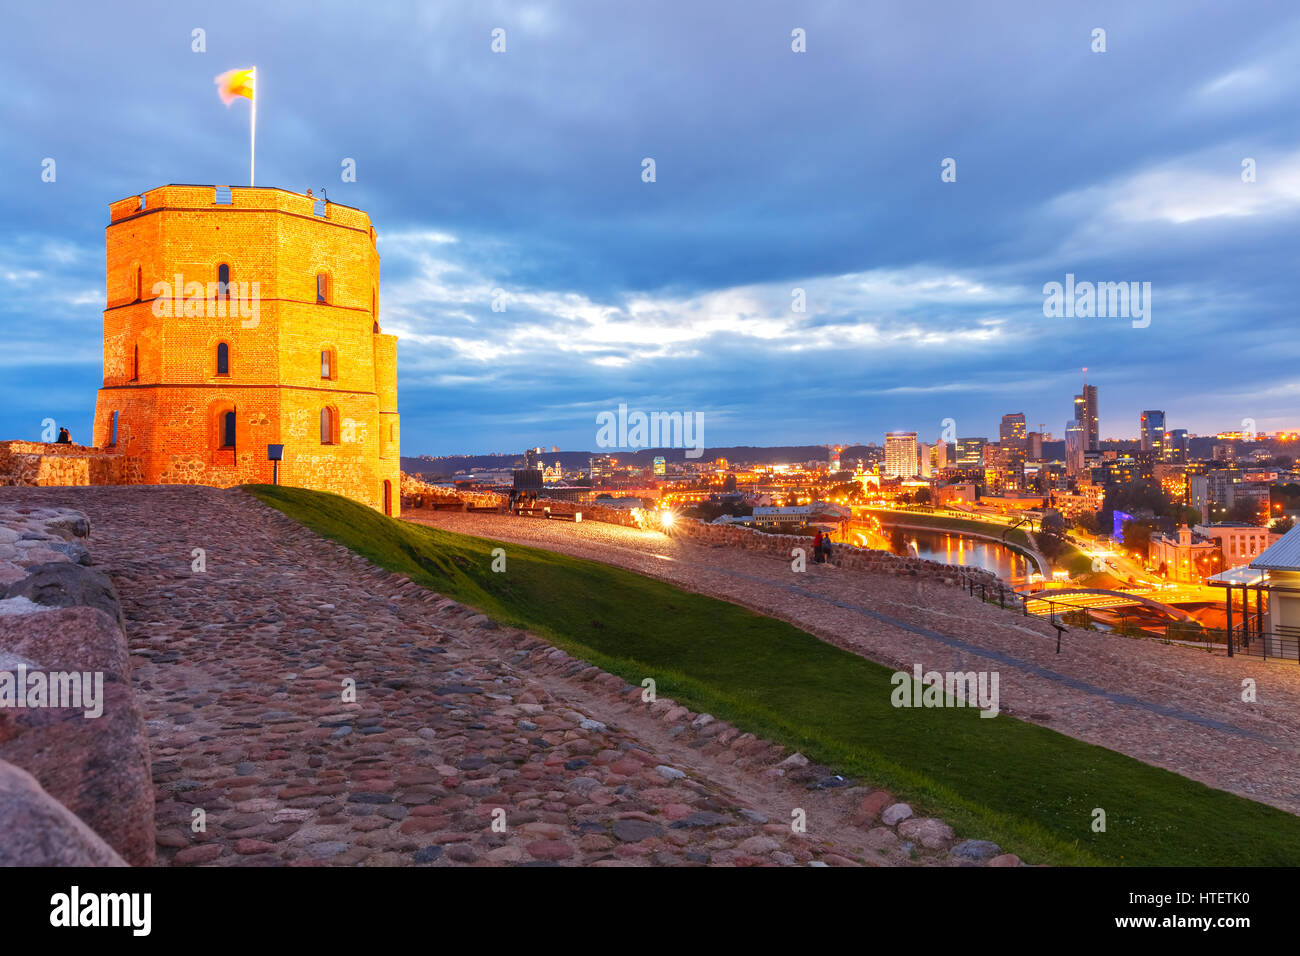 Cityscape with Gediminas Tower and skyscrapers of New Center of Vilnius during twilight blue hour, Vilnius, Lithuania, Baltic states. Stock Photo